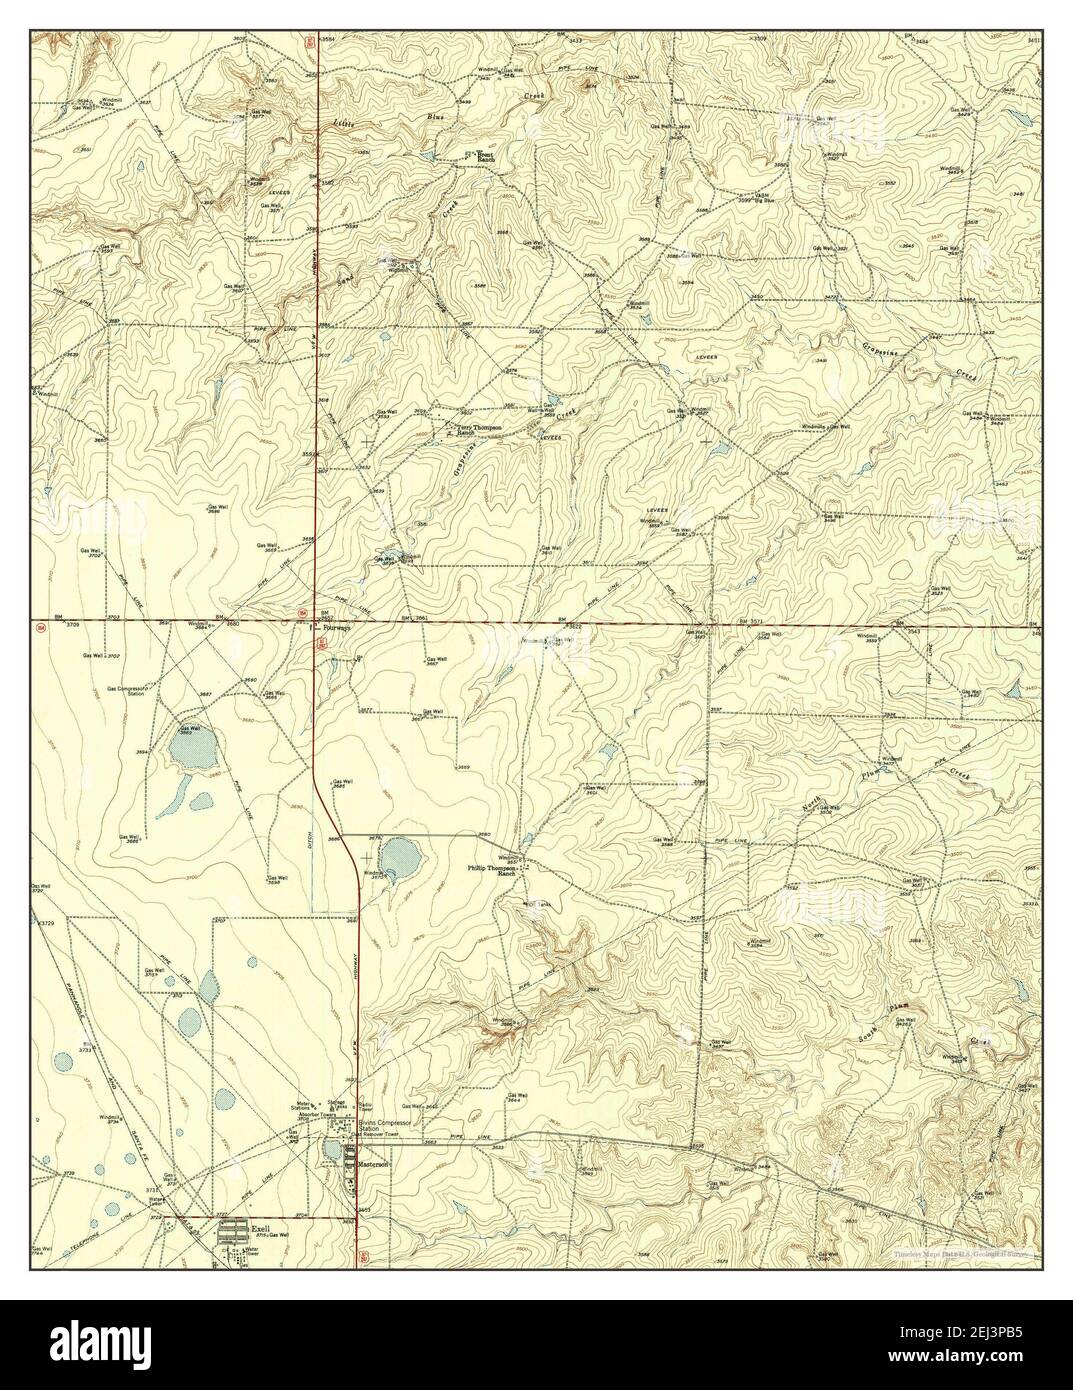 Masterson, Texas, map 1953, 1:24000, United States of America by Timeless Maps, data U.S. Geological Survey Stock Photo